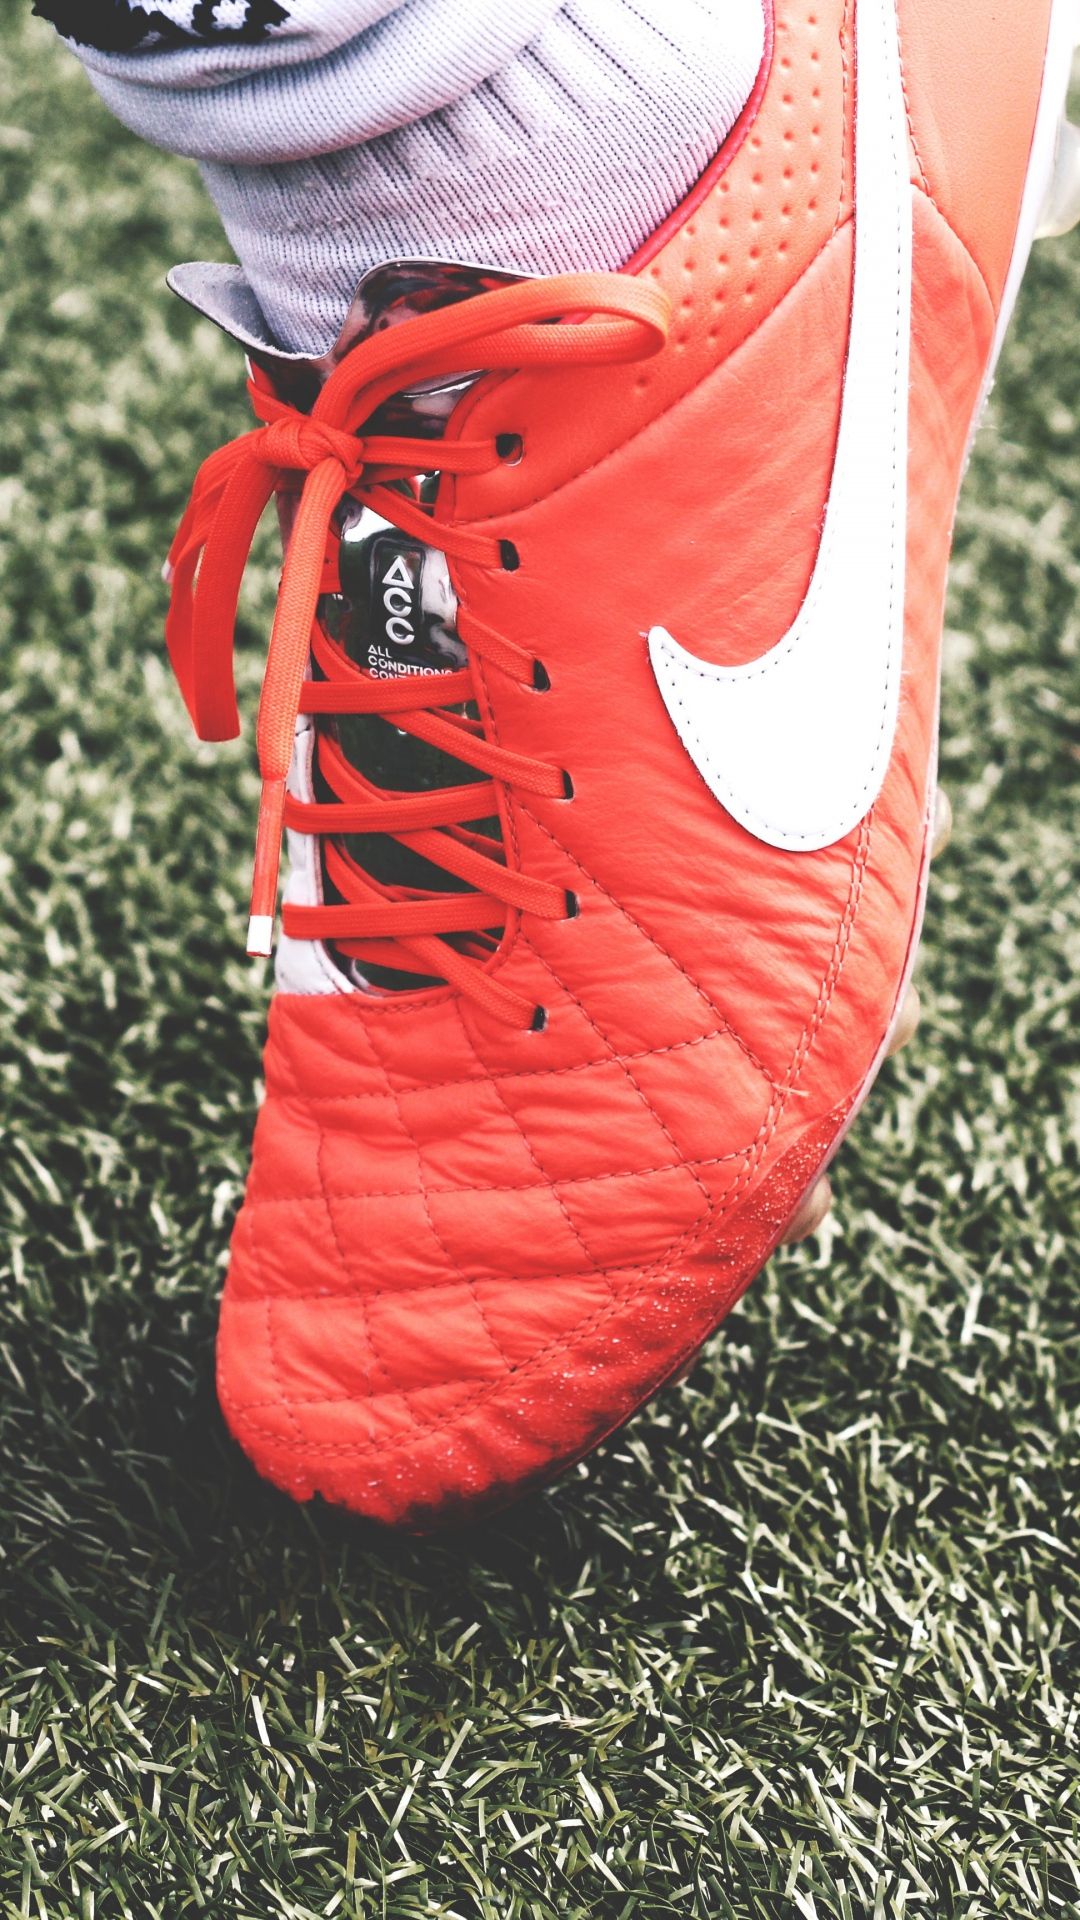 Nike Football Shoes Lawn iPhone Plus Wallpaper